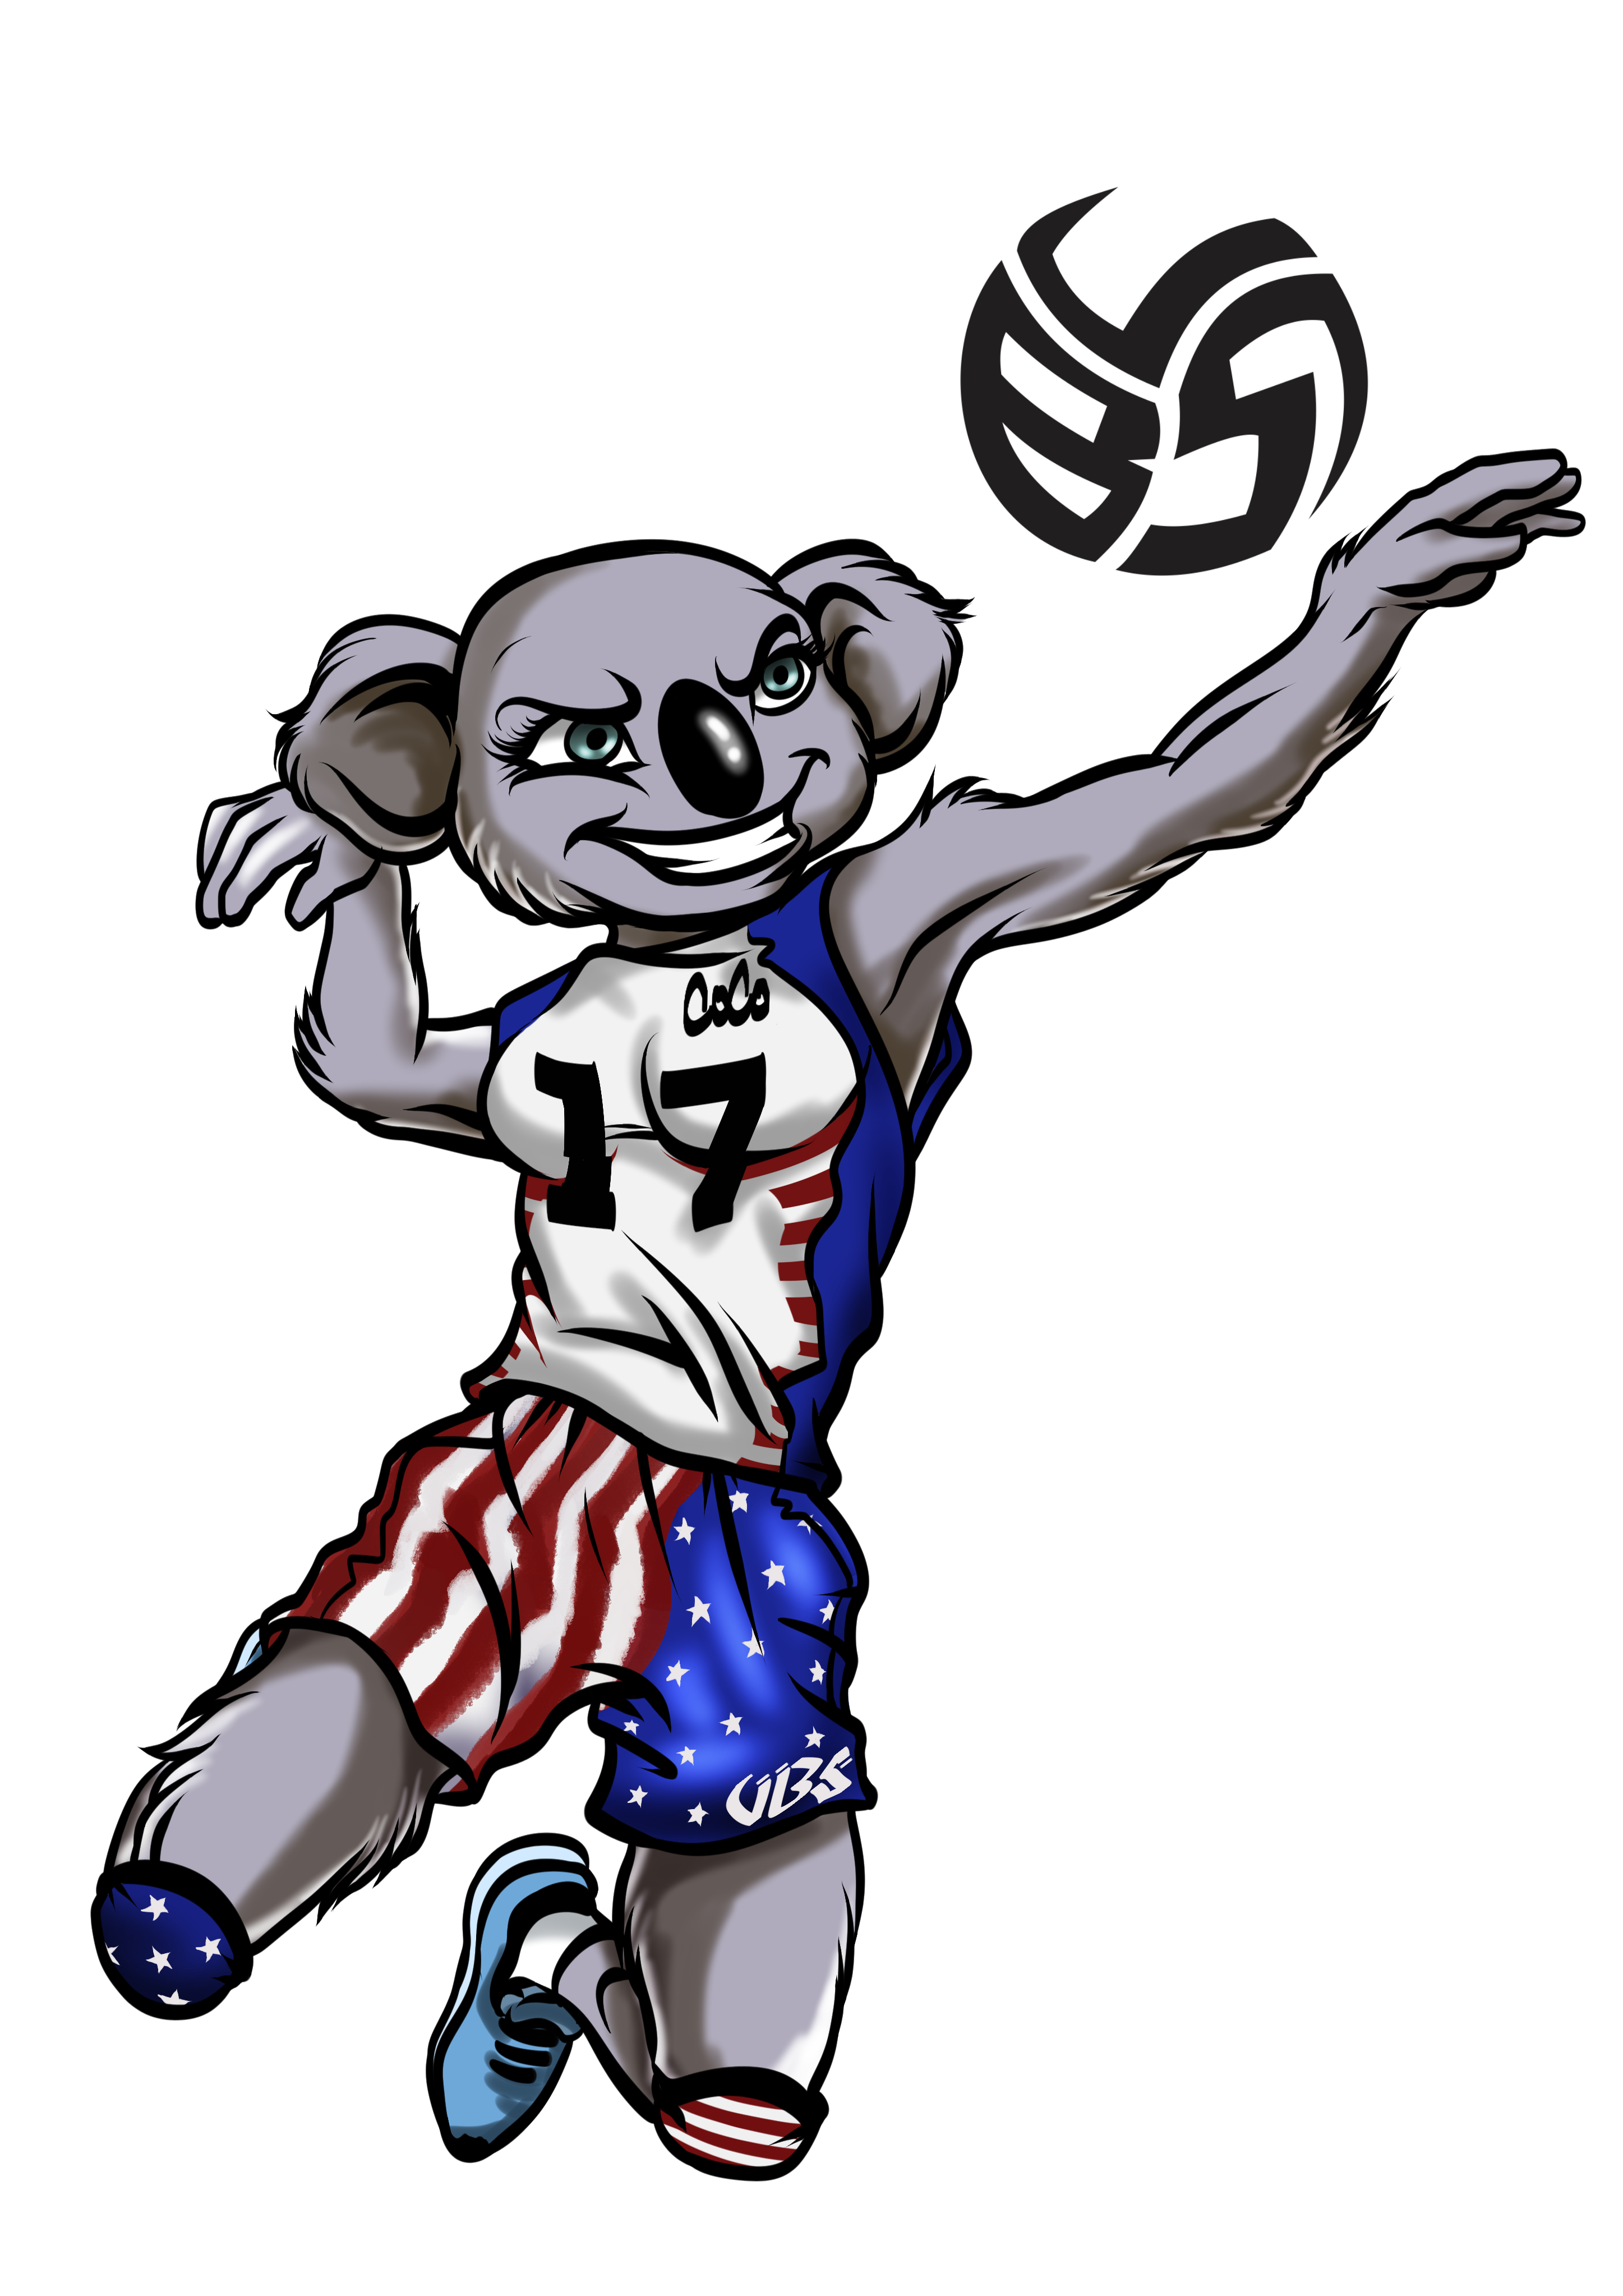 The koala t shirt Is one of my animal t shirt ideas for volleyball players - meet Coco the Koala the most popular player on the Volleyragswag All Beast Team.